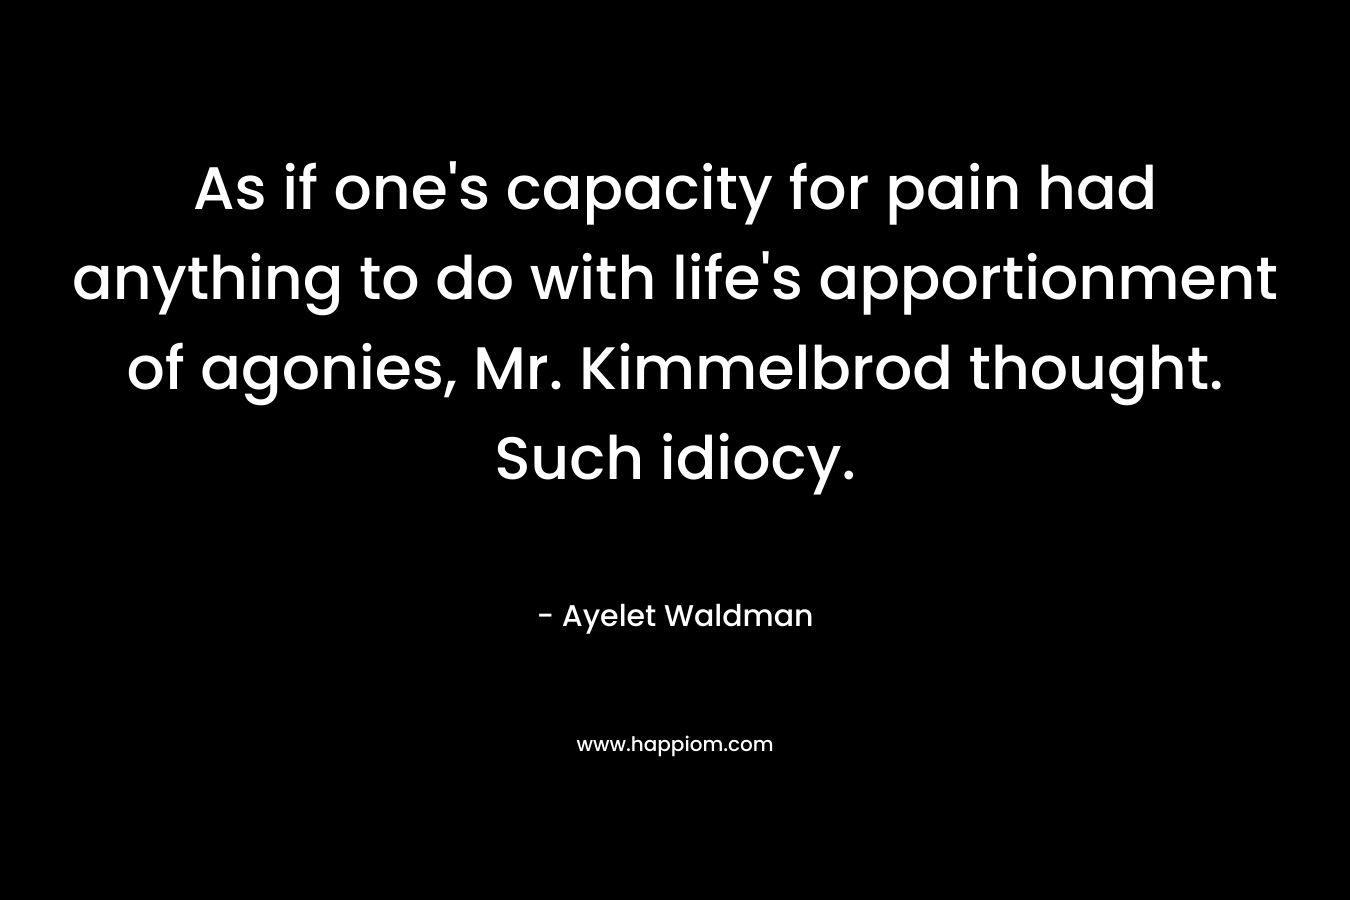 As if one’s capacity for pain had anything to do with life’s apportionment of agonies, Mr. Kimmelbrod thought. Such idiocy. – Ayelet Waldman